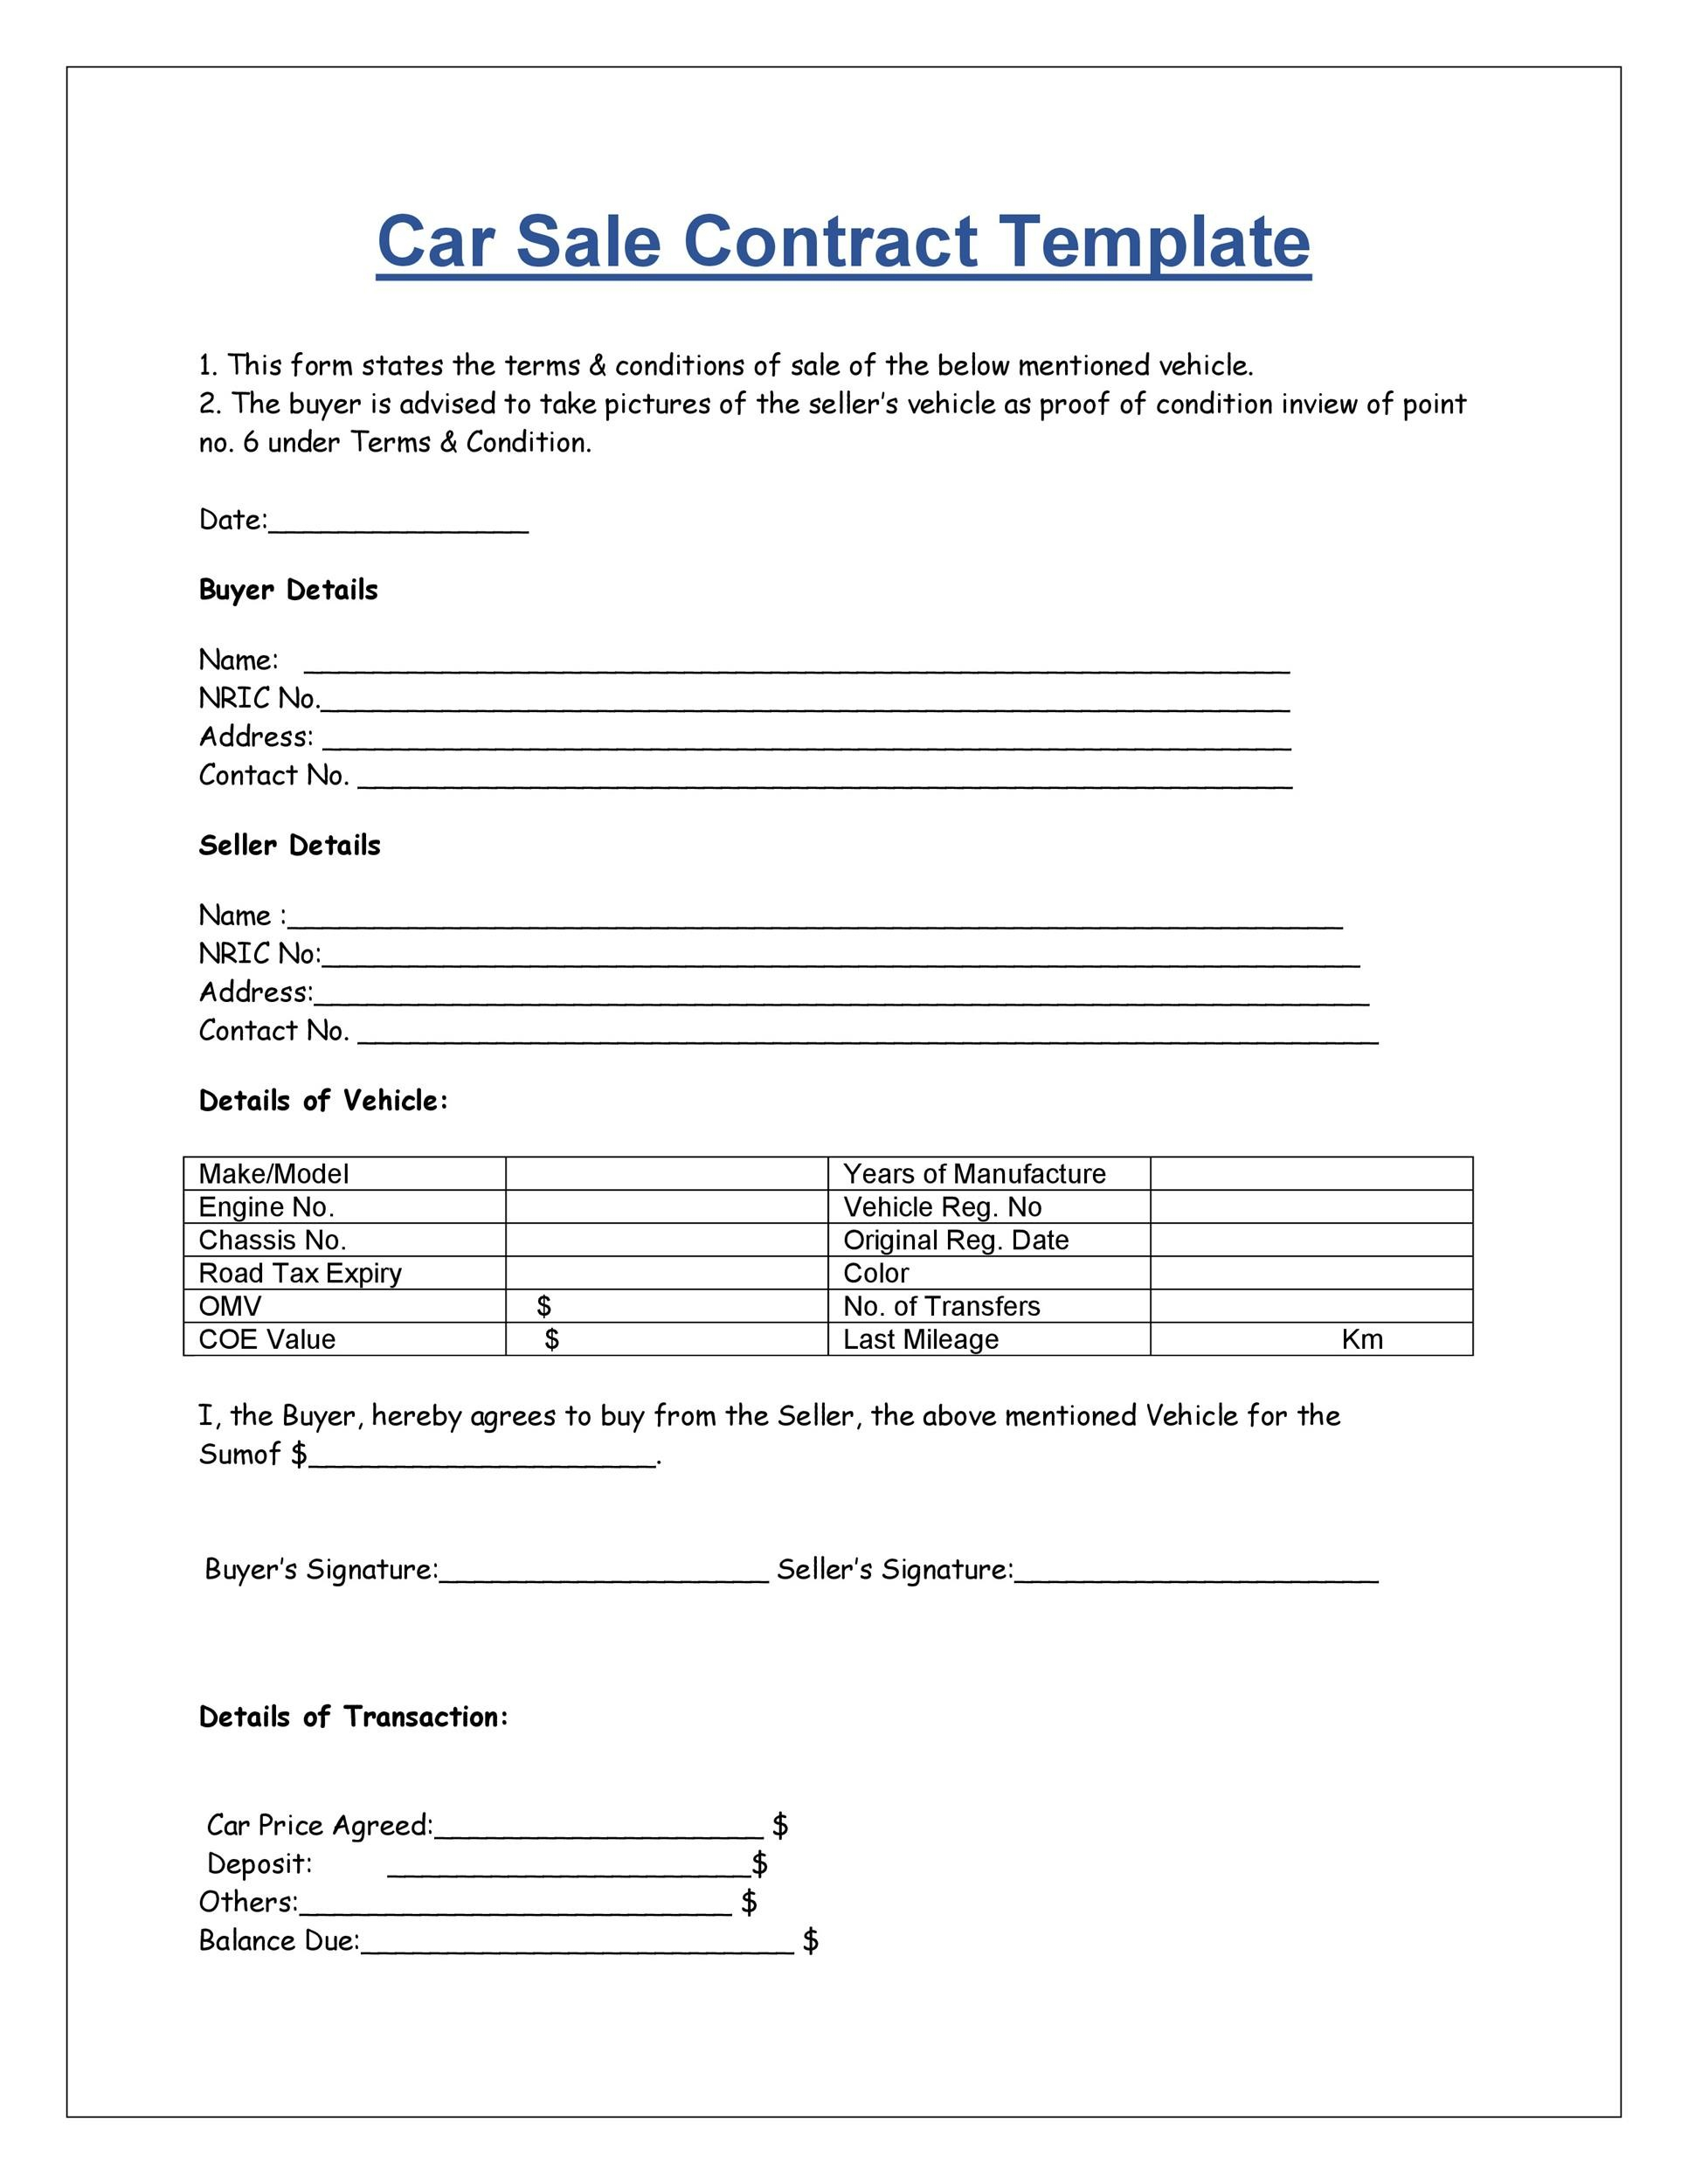 10 Printable Vehicle Purchase Agreement Templates ᐅ TemplateLab In Vehicle Deposit Agreement Form Intended For Vehicle Deposit Agreement Form